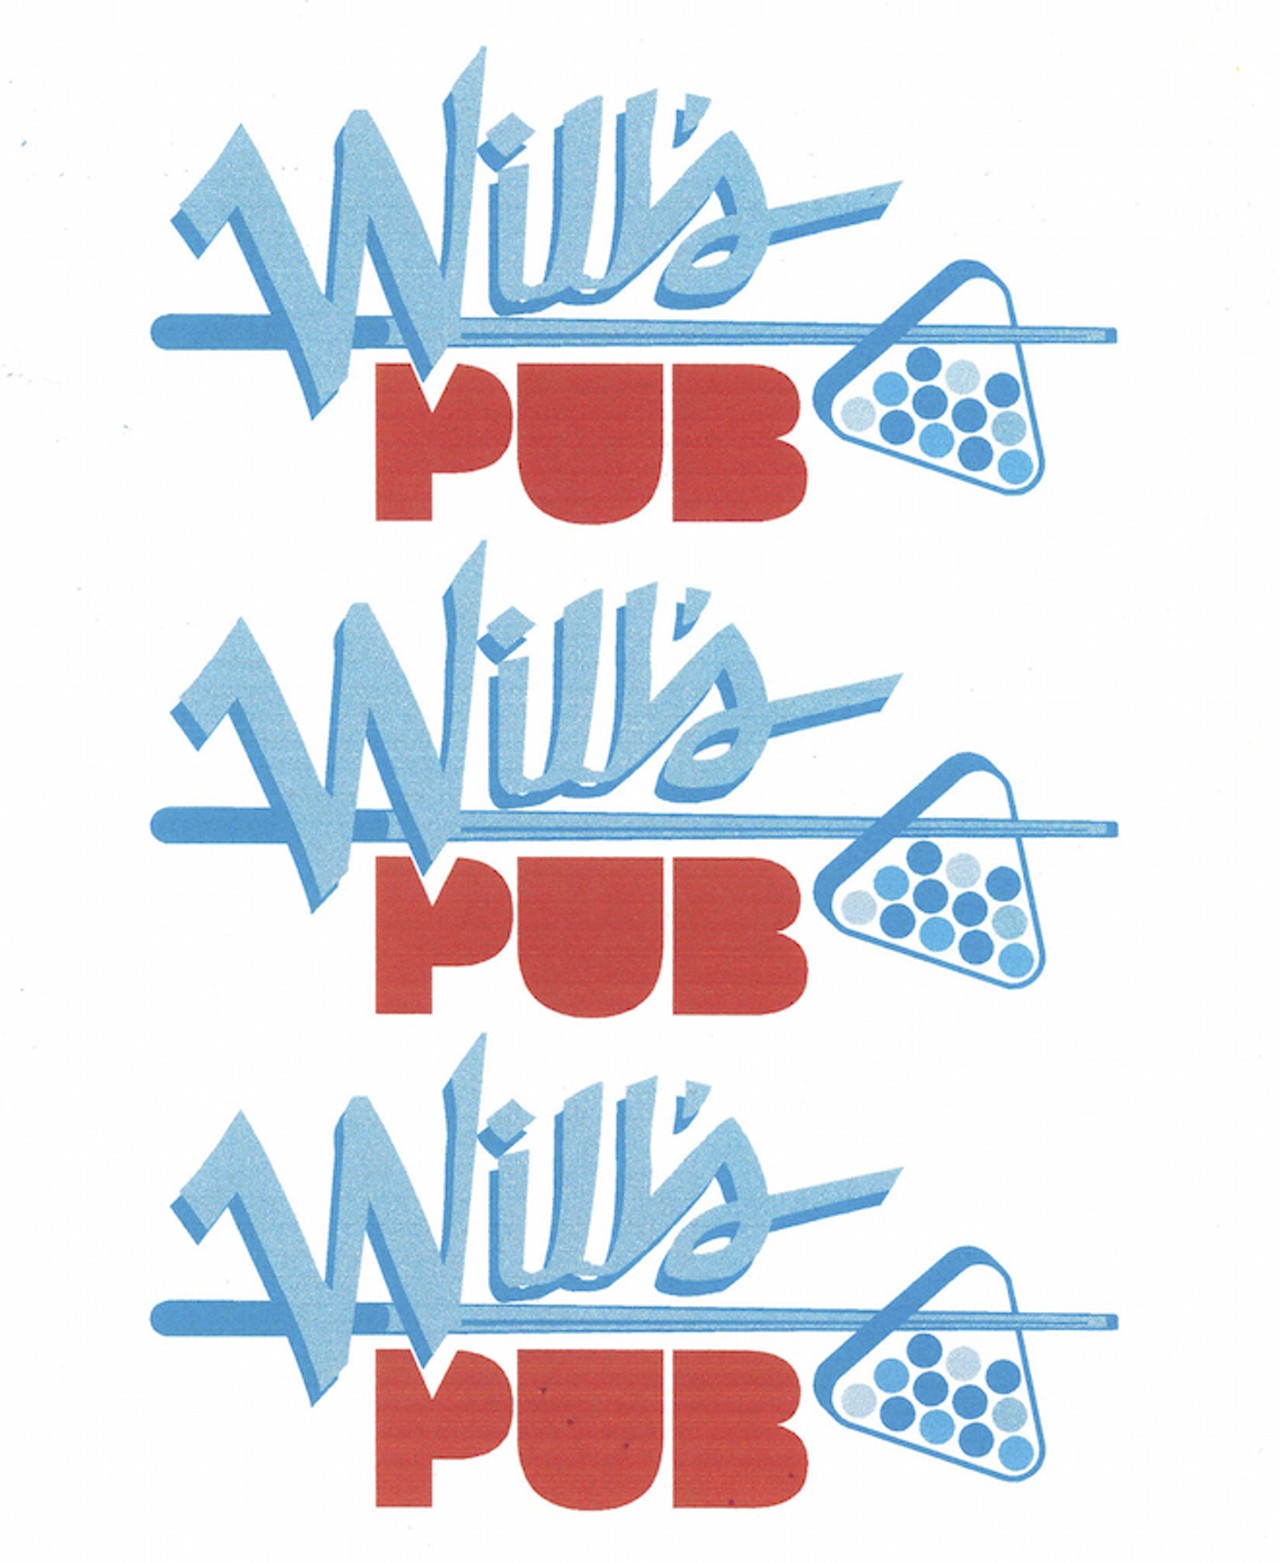 Screw downtown! Looking back at 20 years of Will's Pub